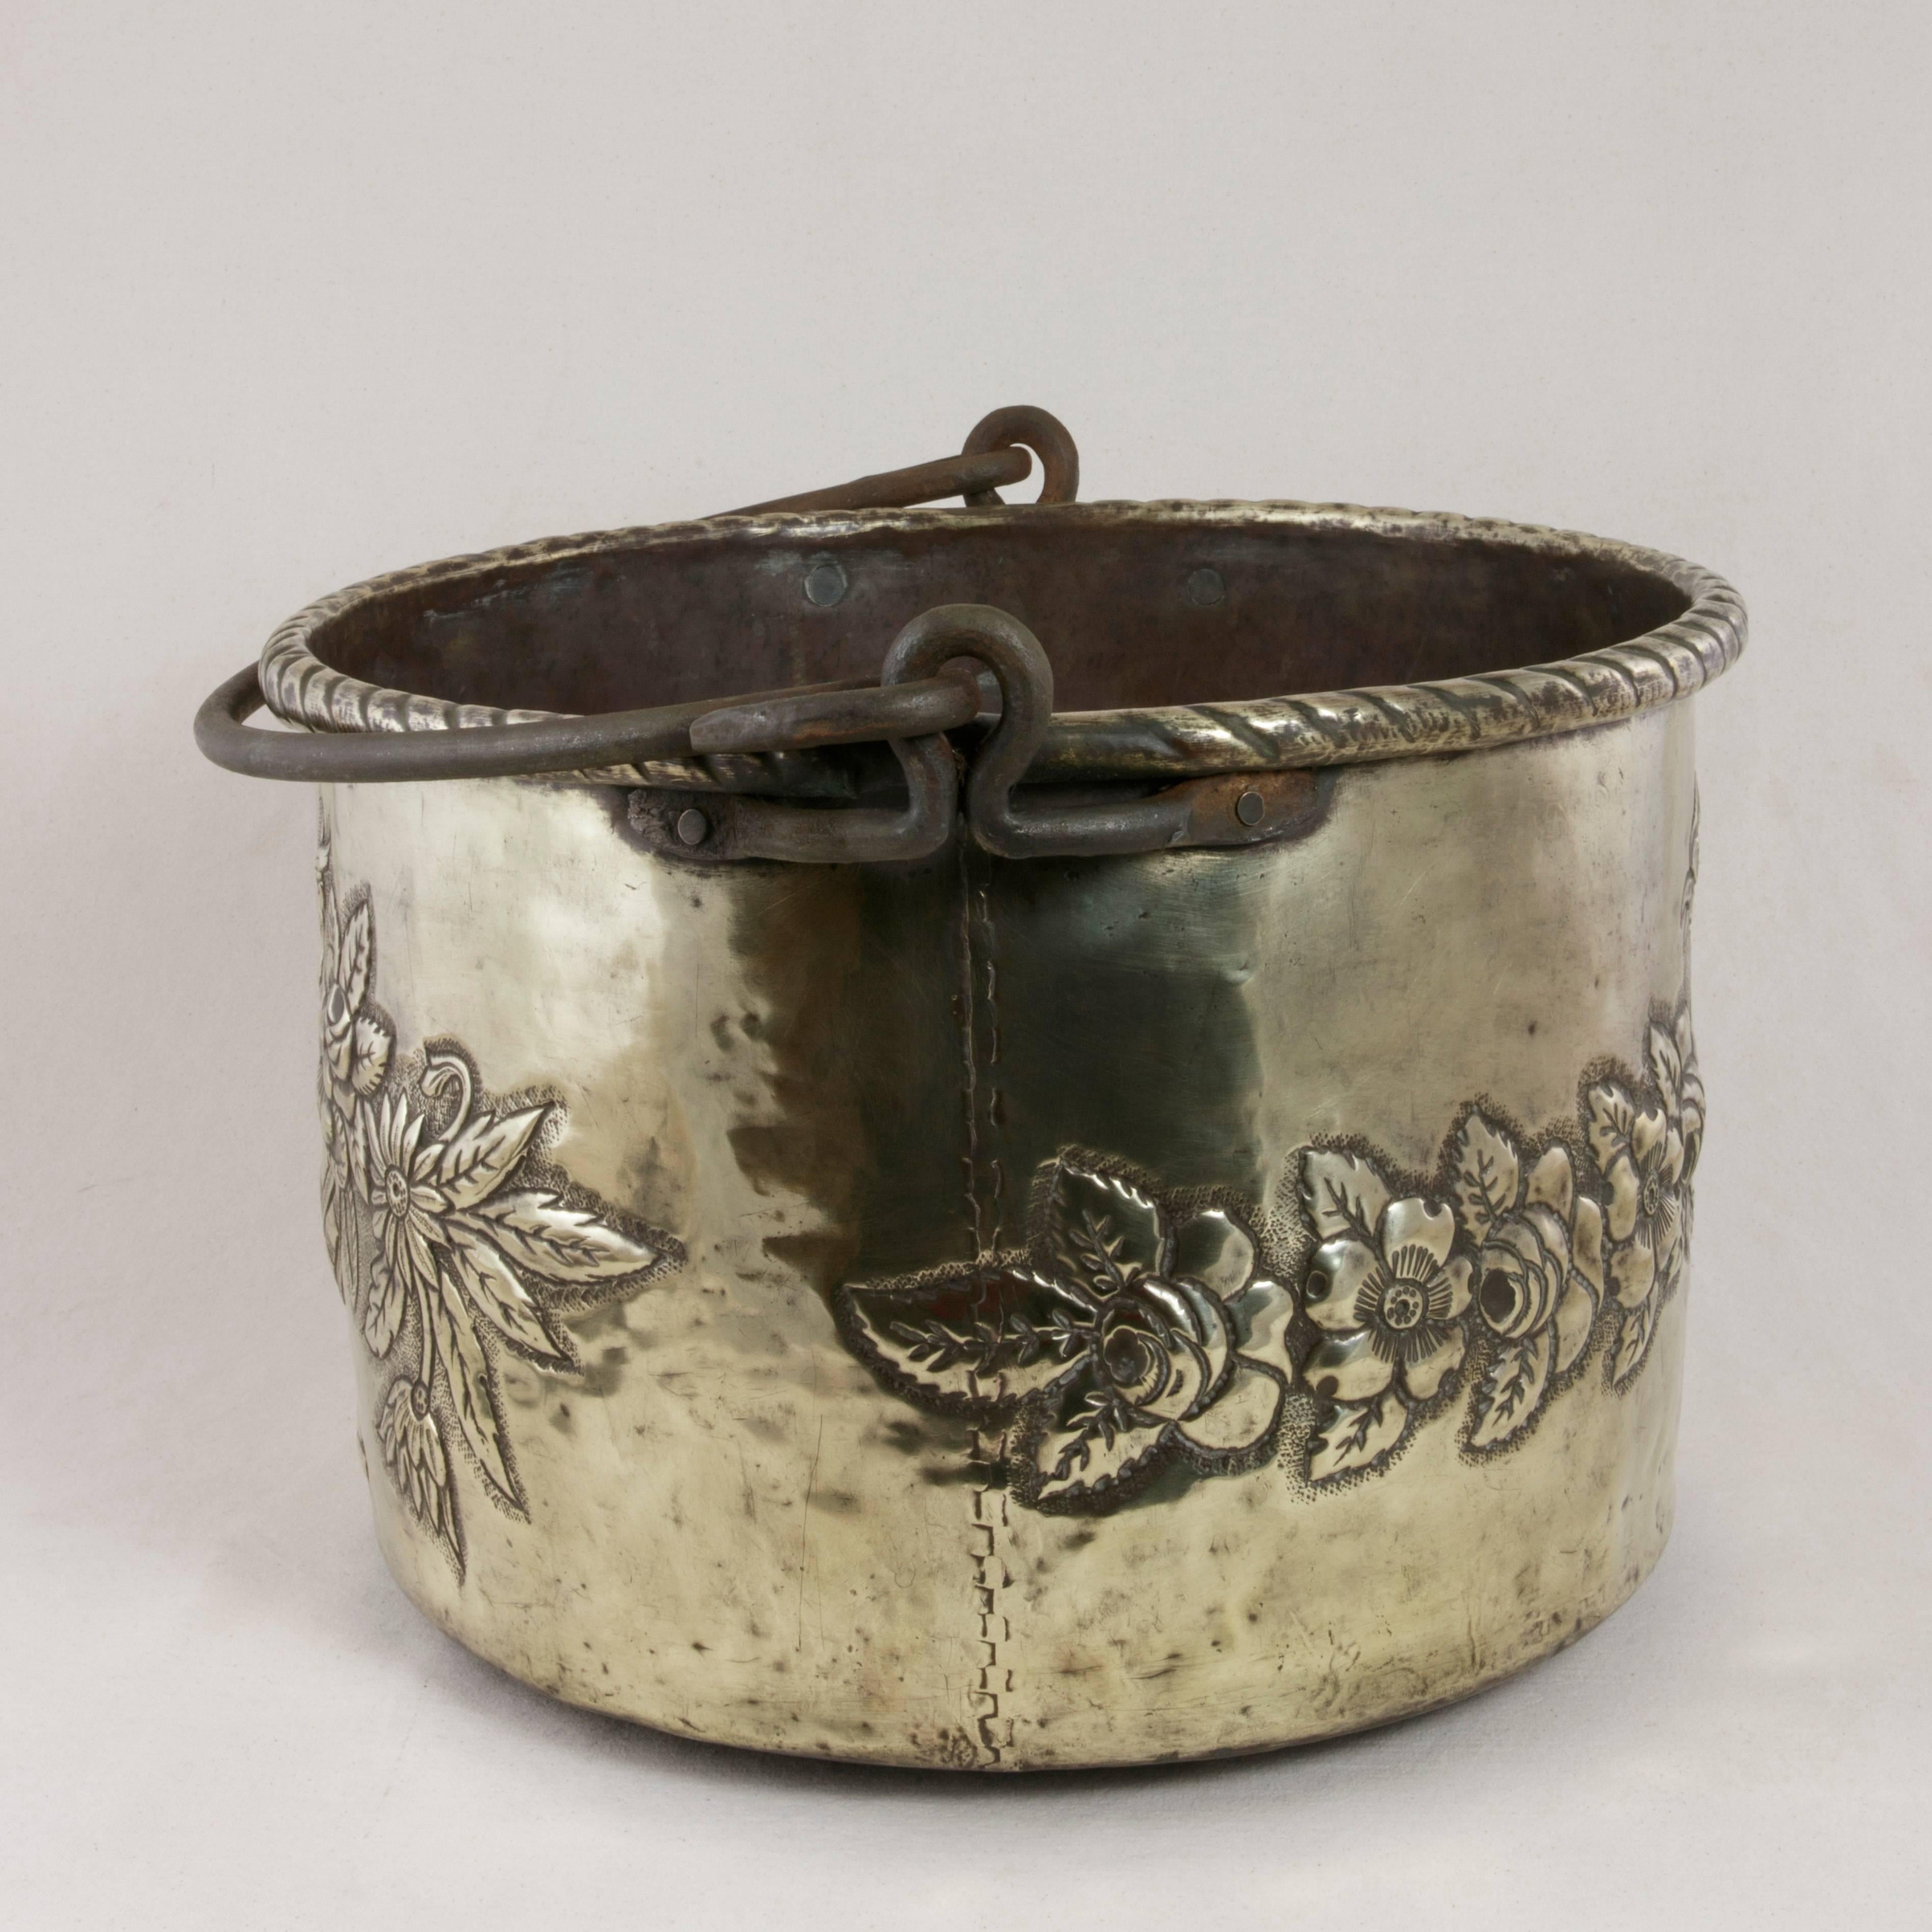 Late 18th Century Large 18th Century French Louis XVI Period Brass Repousse Cauldron or Cachepot